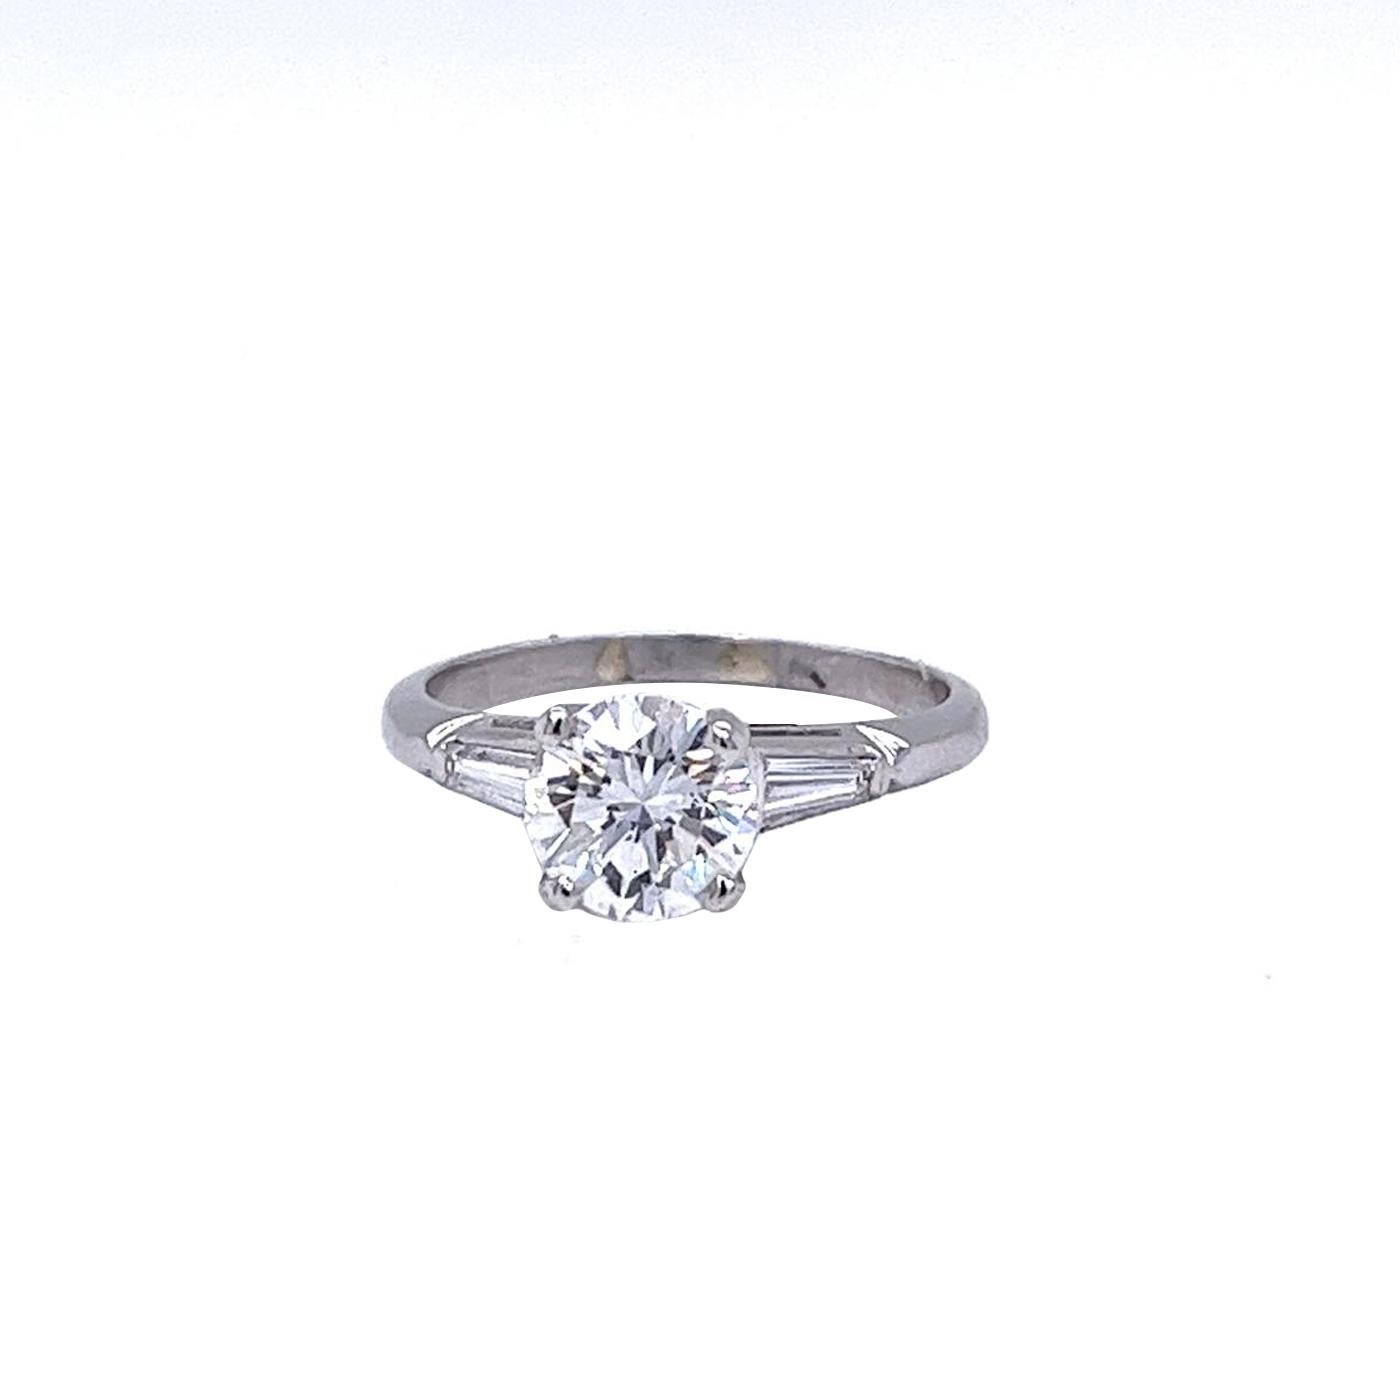 Modernist GIA 1.64ct Natural Round Diamond 14K Gold Ring with 0.45ct Baguettes Diamonds For Sale